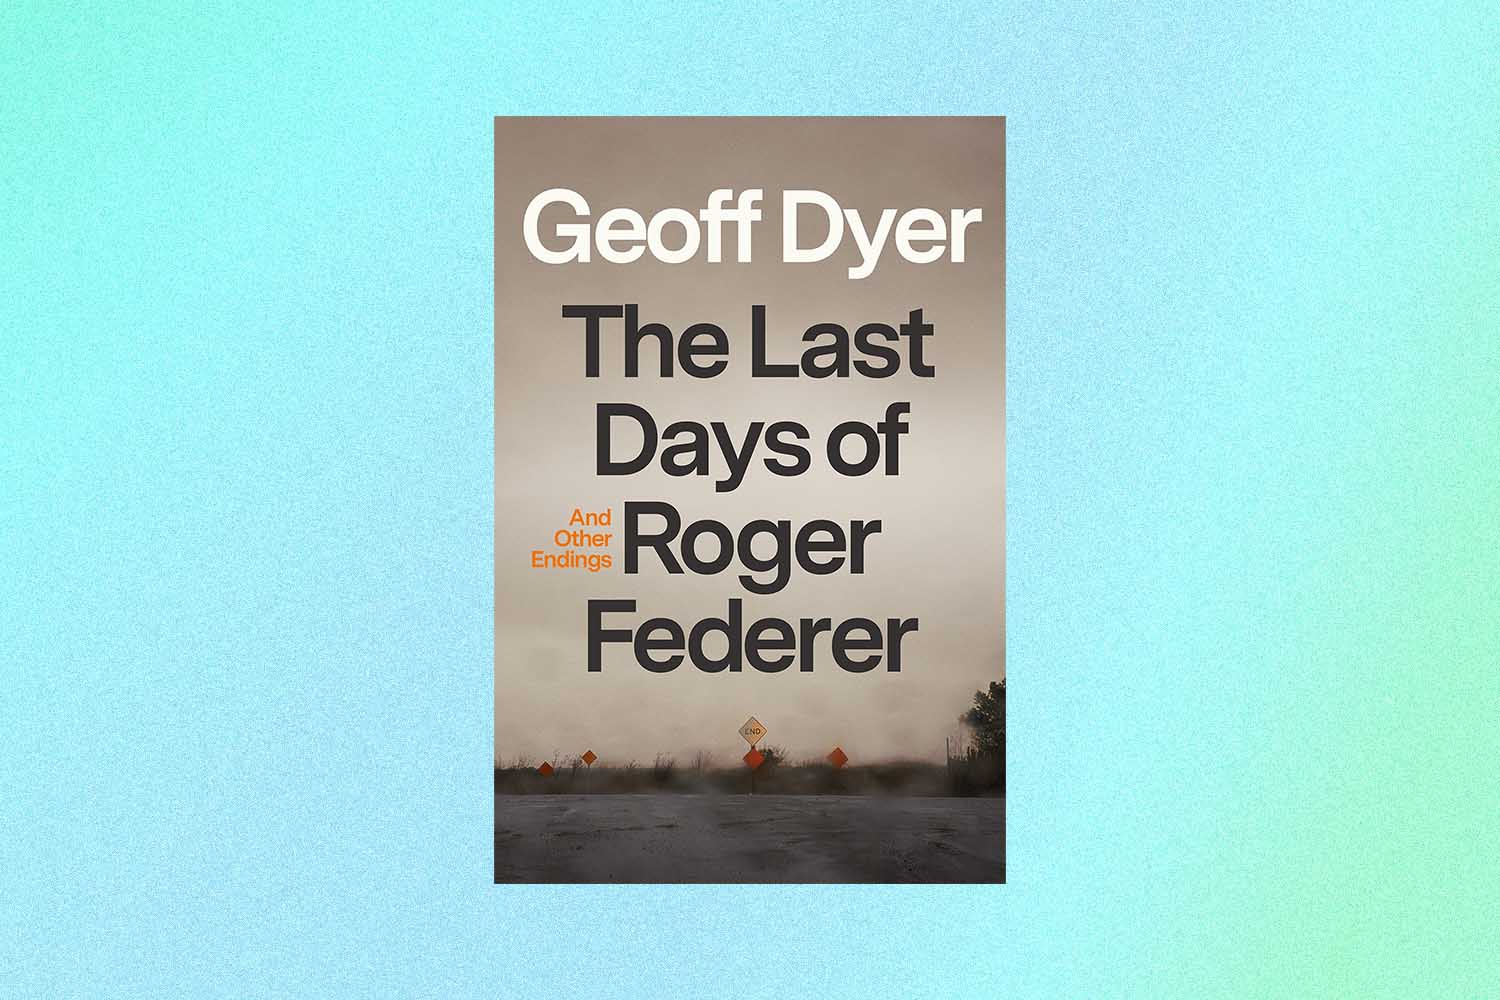 The Last Days of Roger Federer book cover